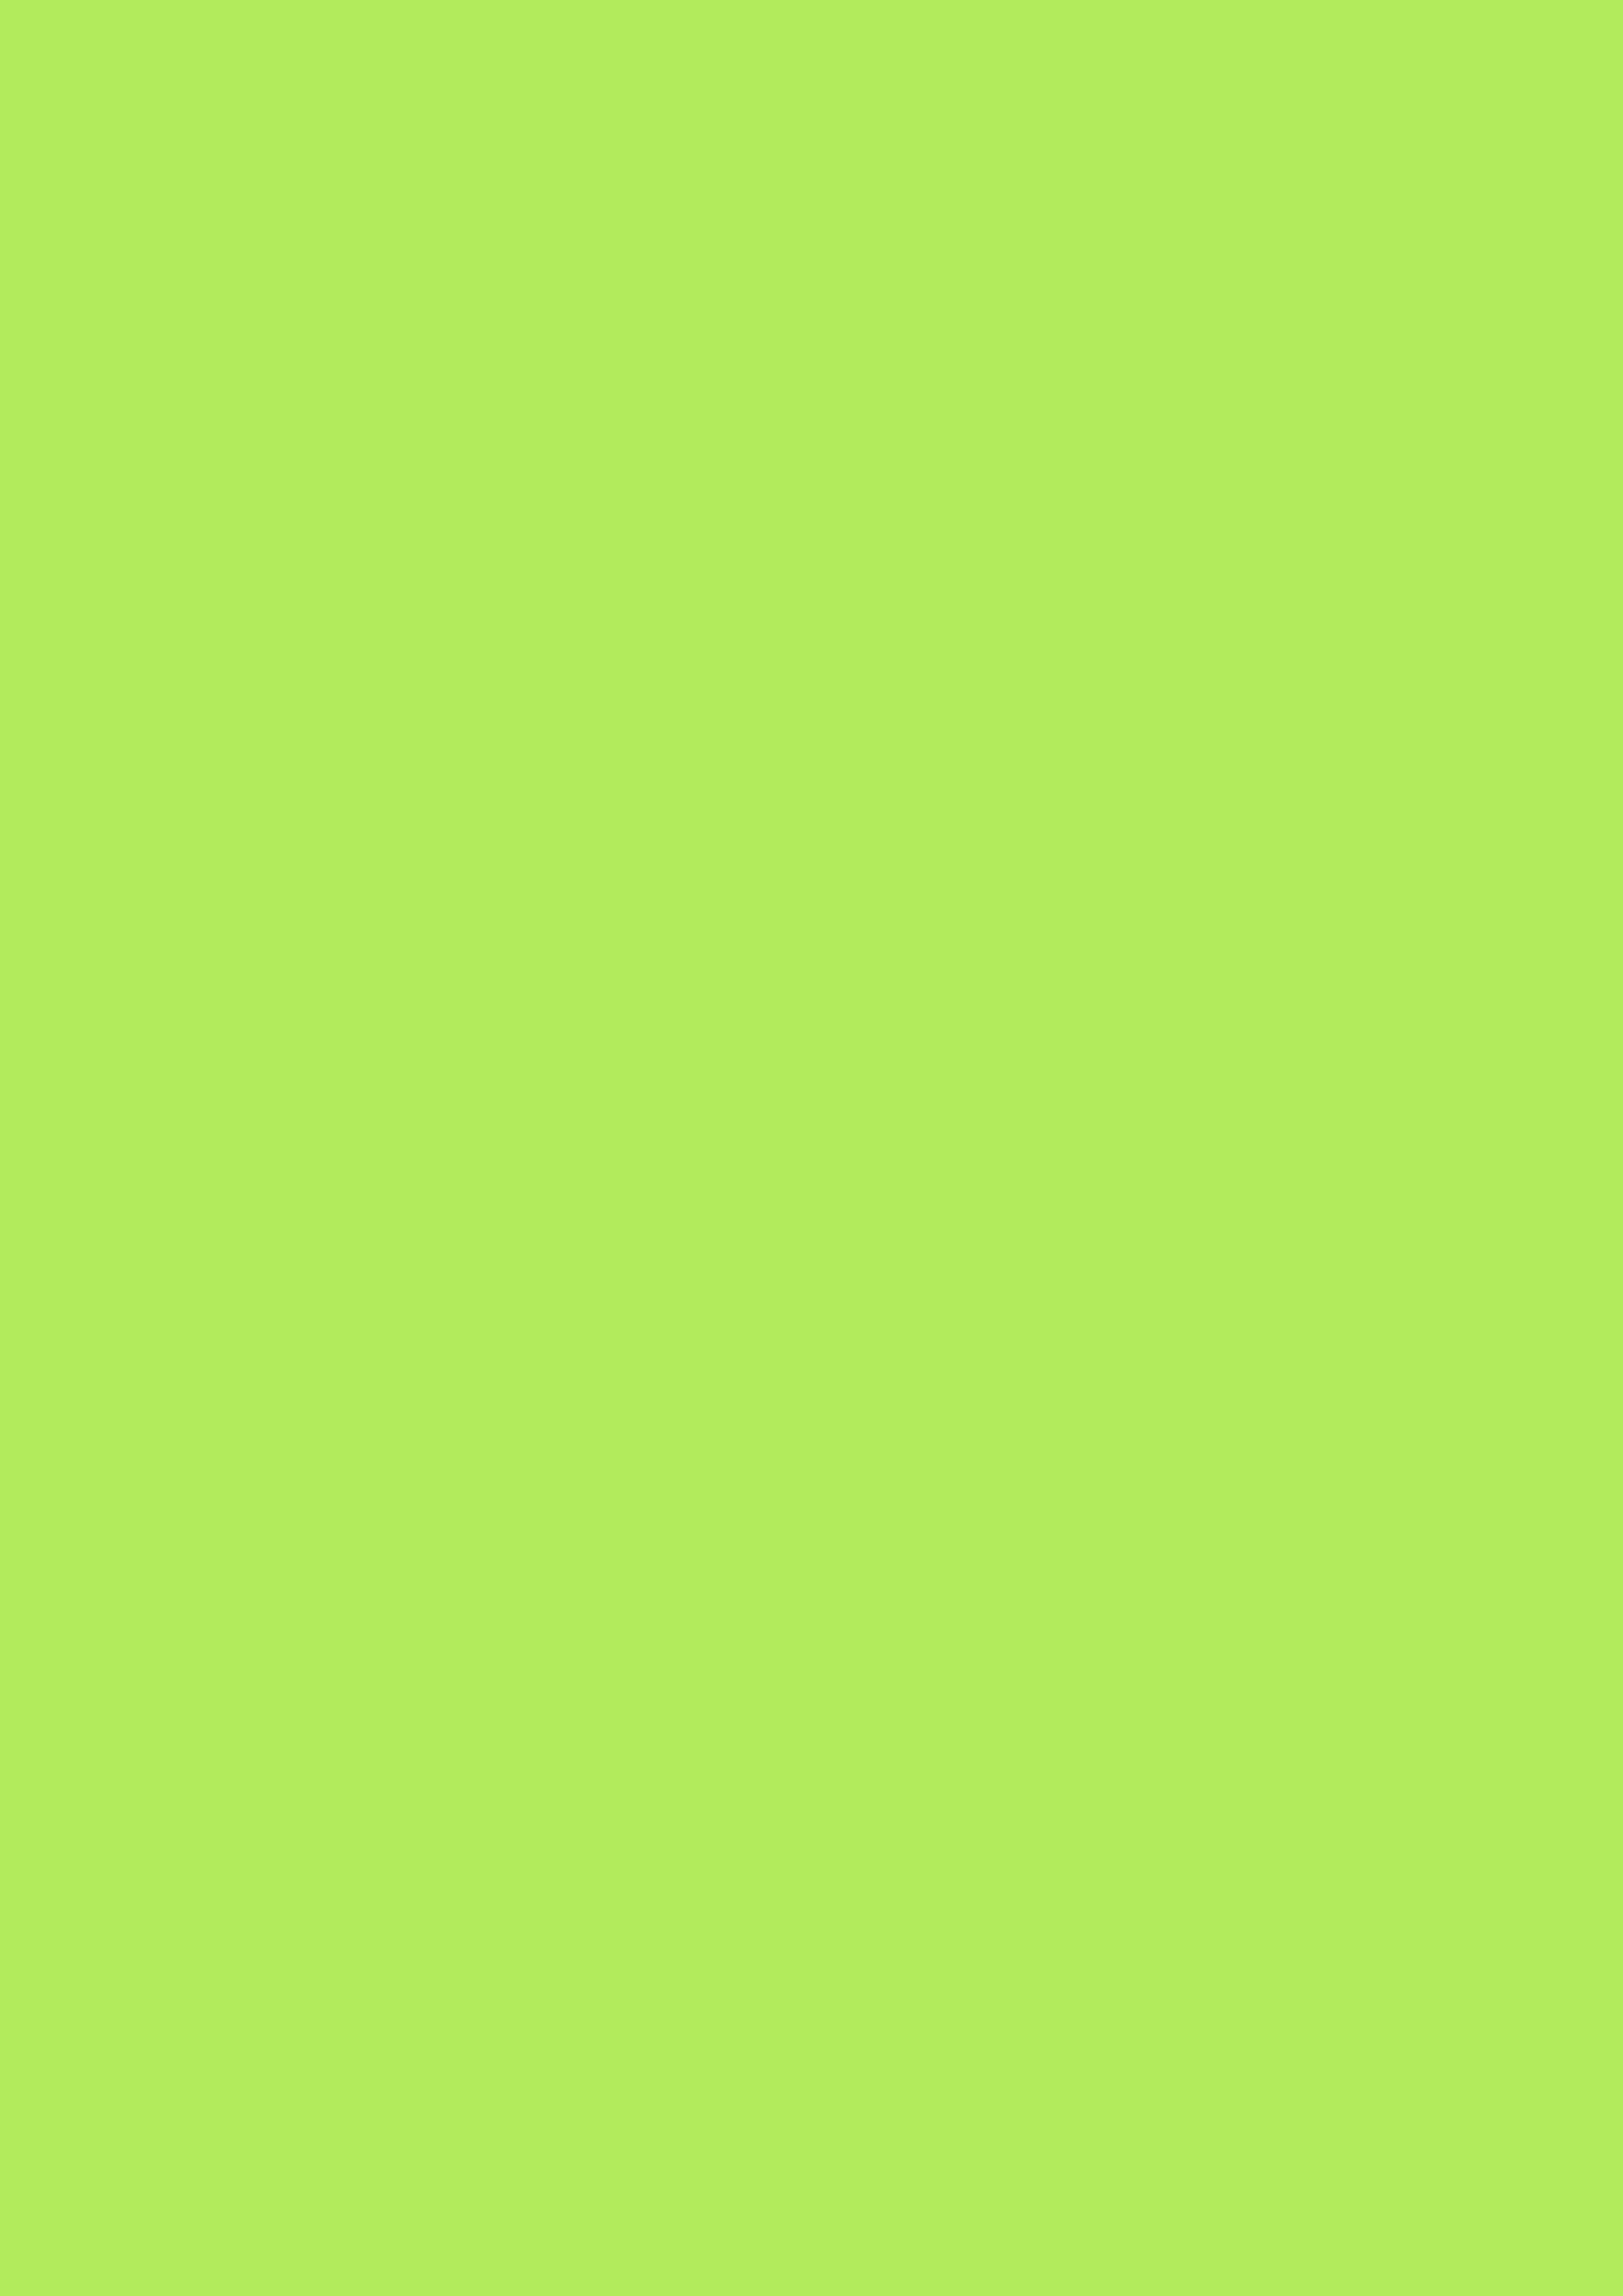 2480x3508 Inchworm Solid Color Background